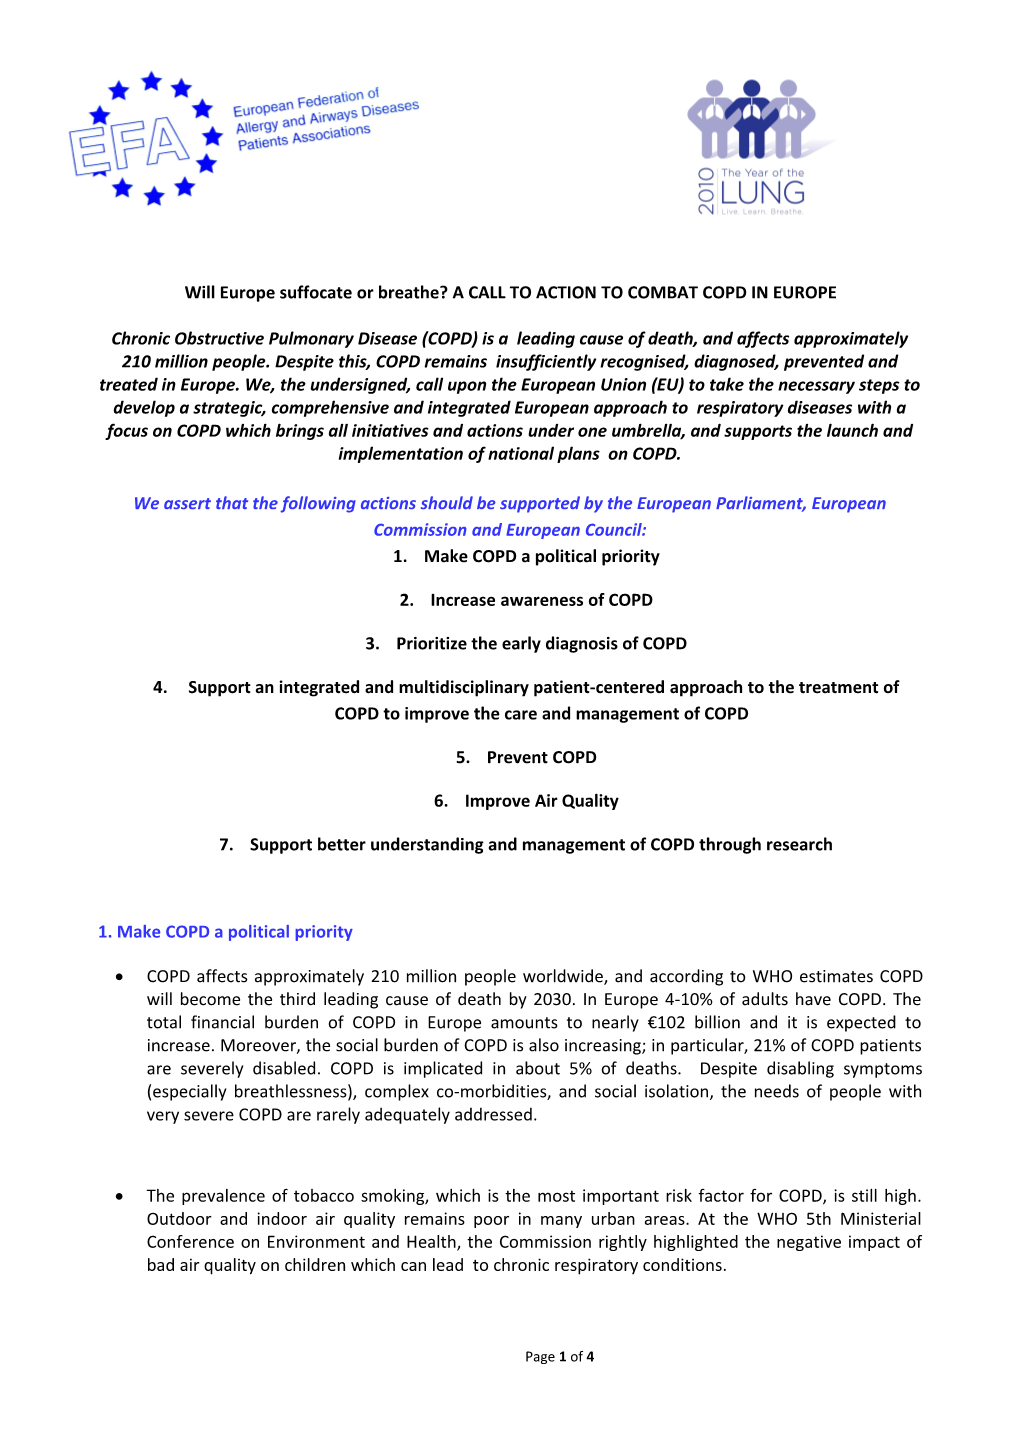 EFA Call-To-Action on COPD for Europe Page 1 of 3